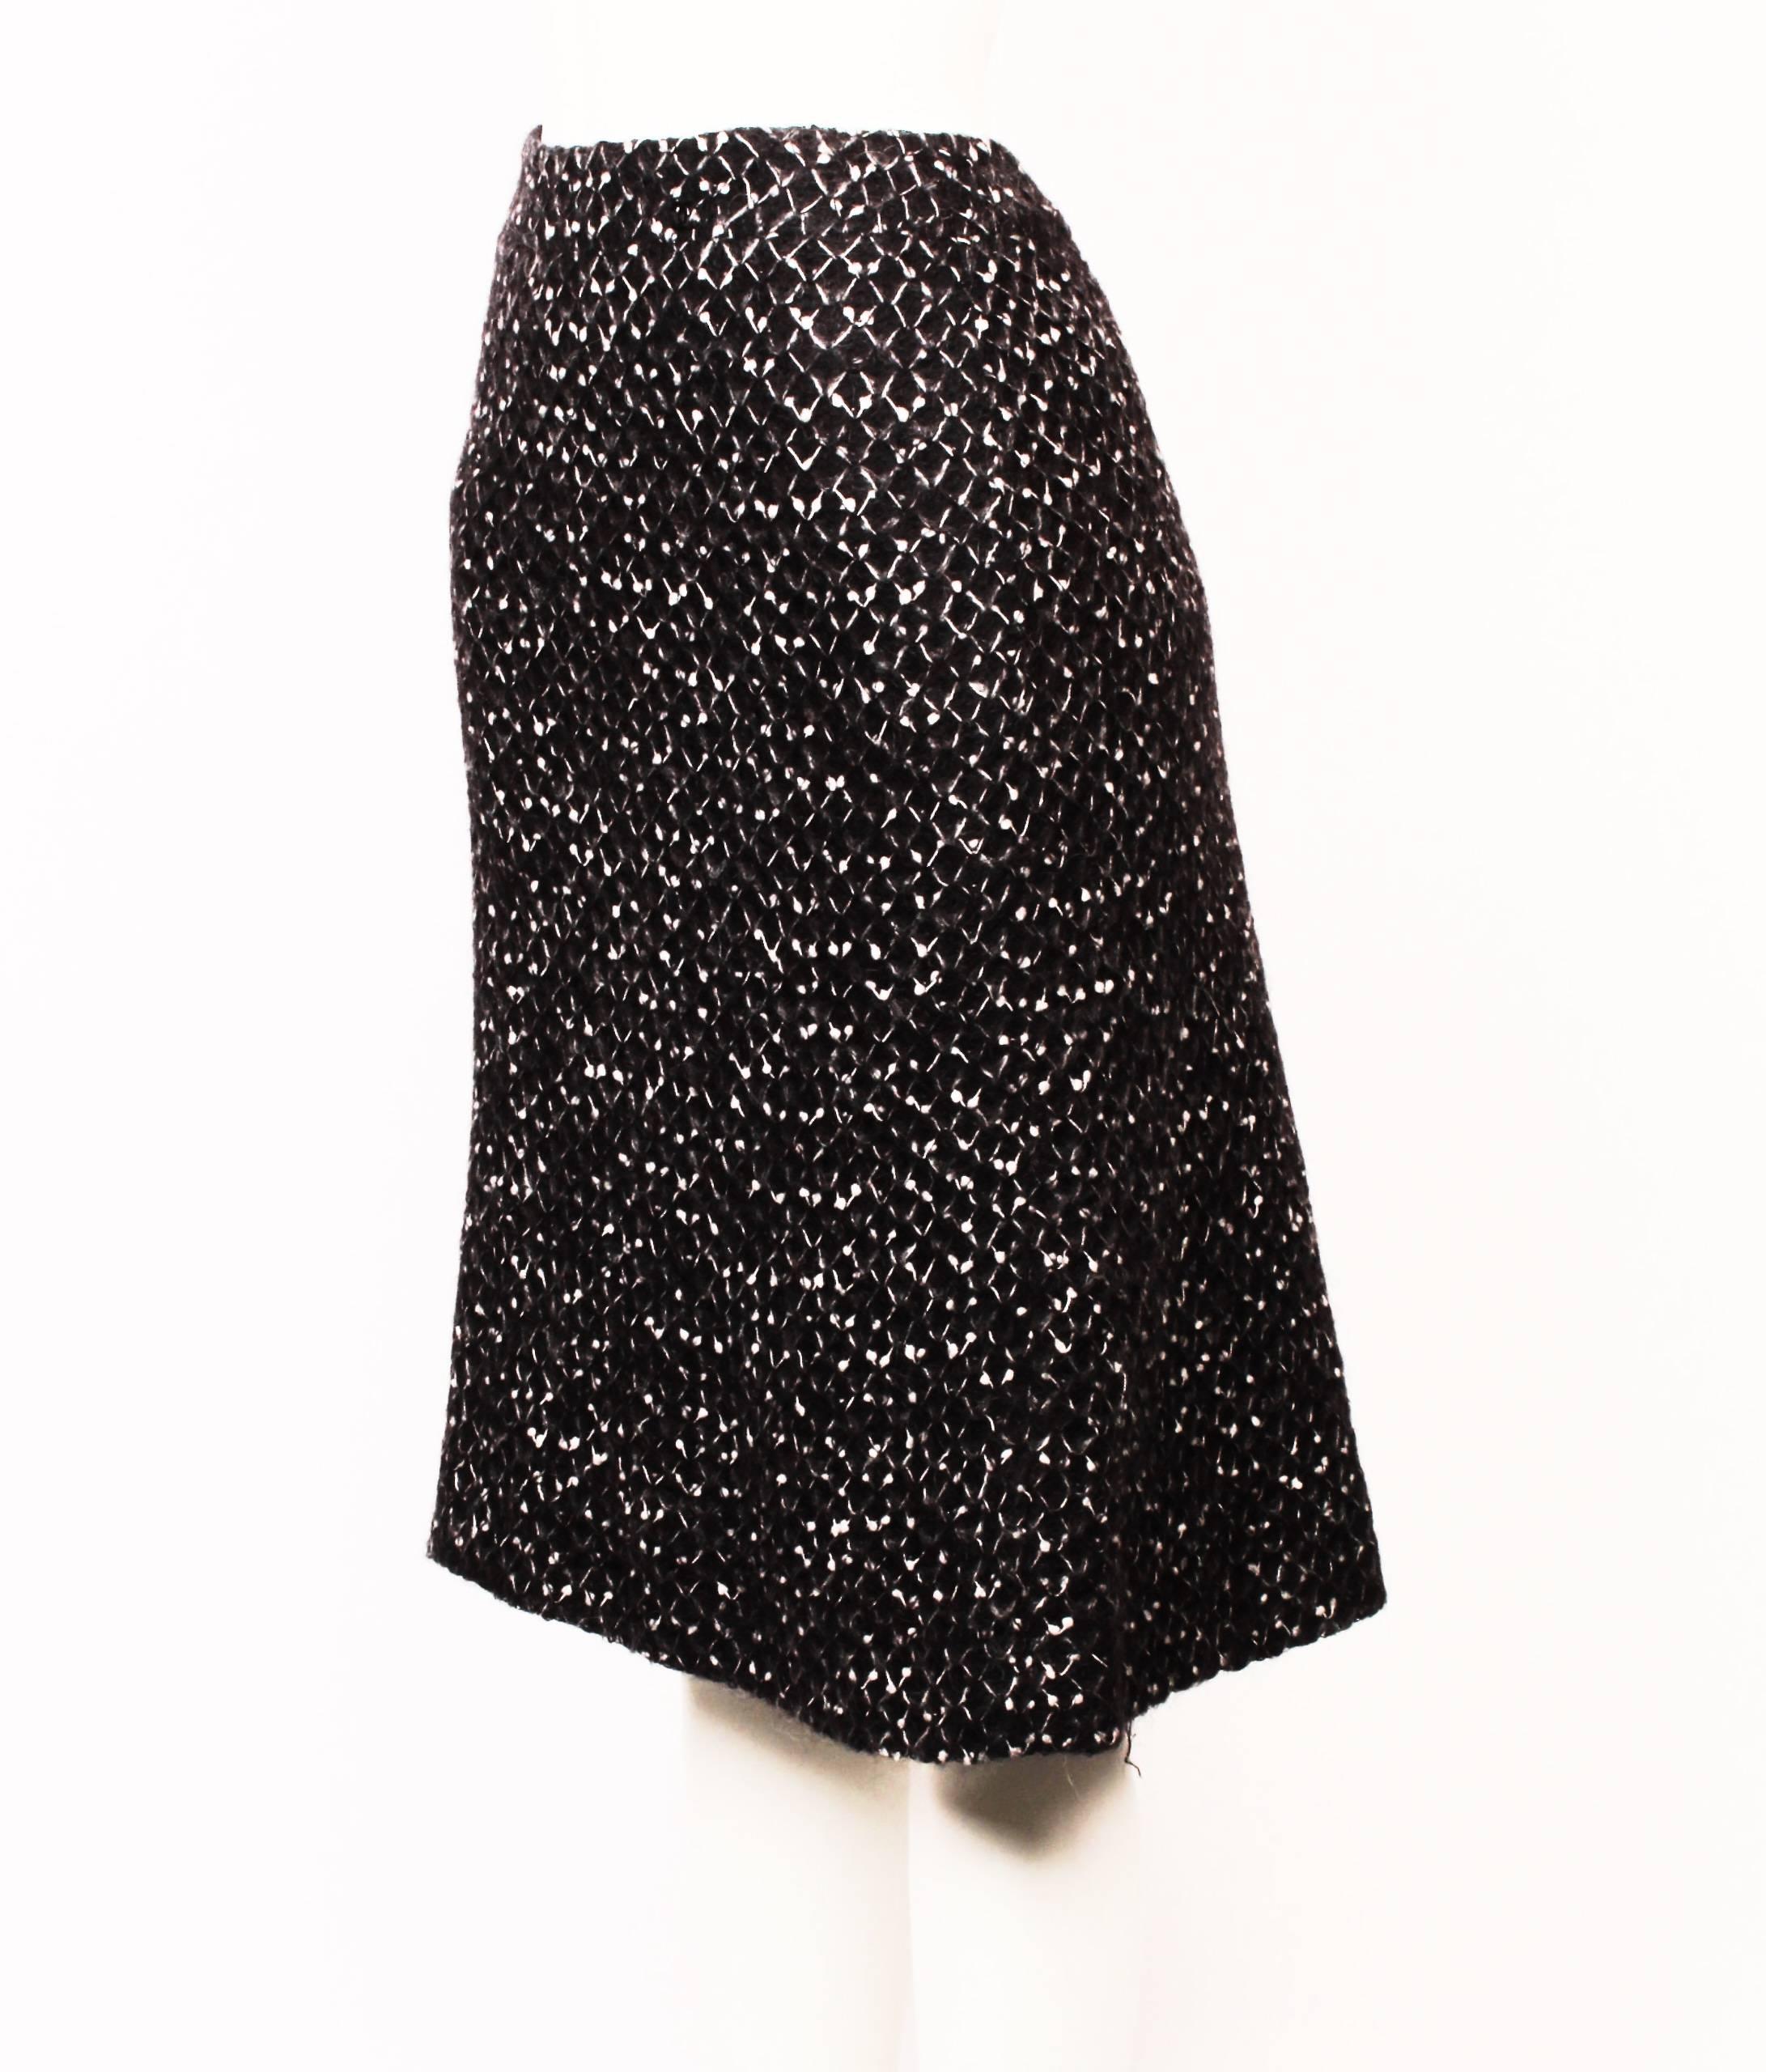 Gorgeous Chanel wool knit skirt in black, grey and white honeycomb knit. 
The top features a boat neck and a curved knitted yoke that contours the hip. The skirt is A-line and fully lined. Made in France. Size 46.
